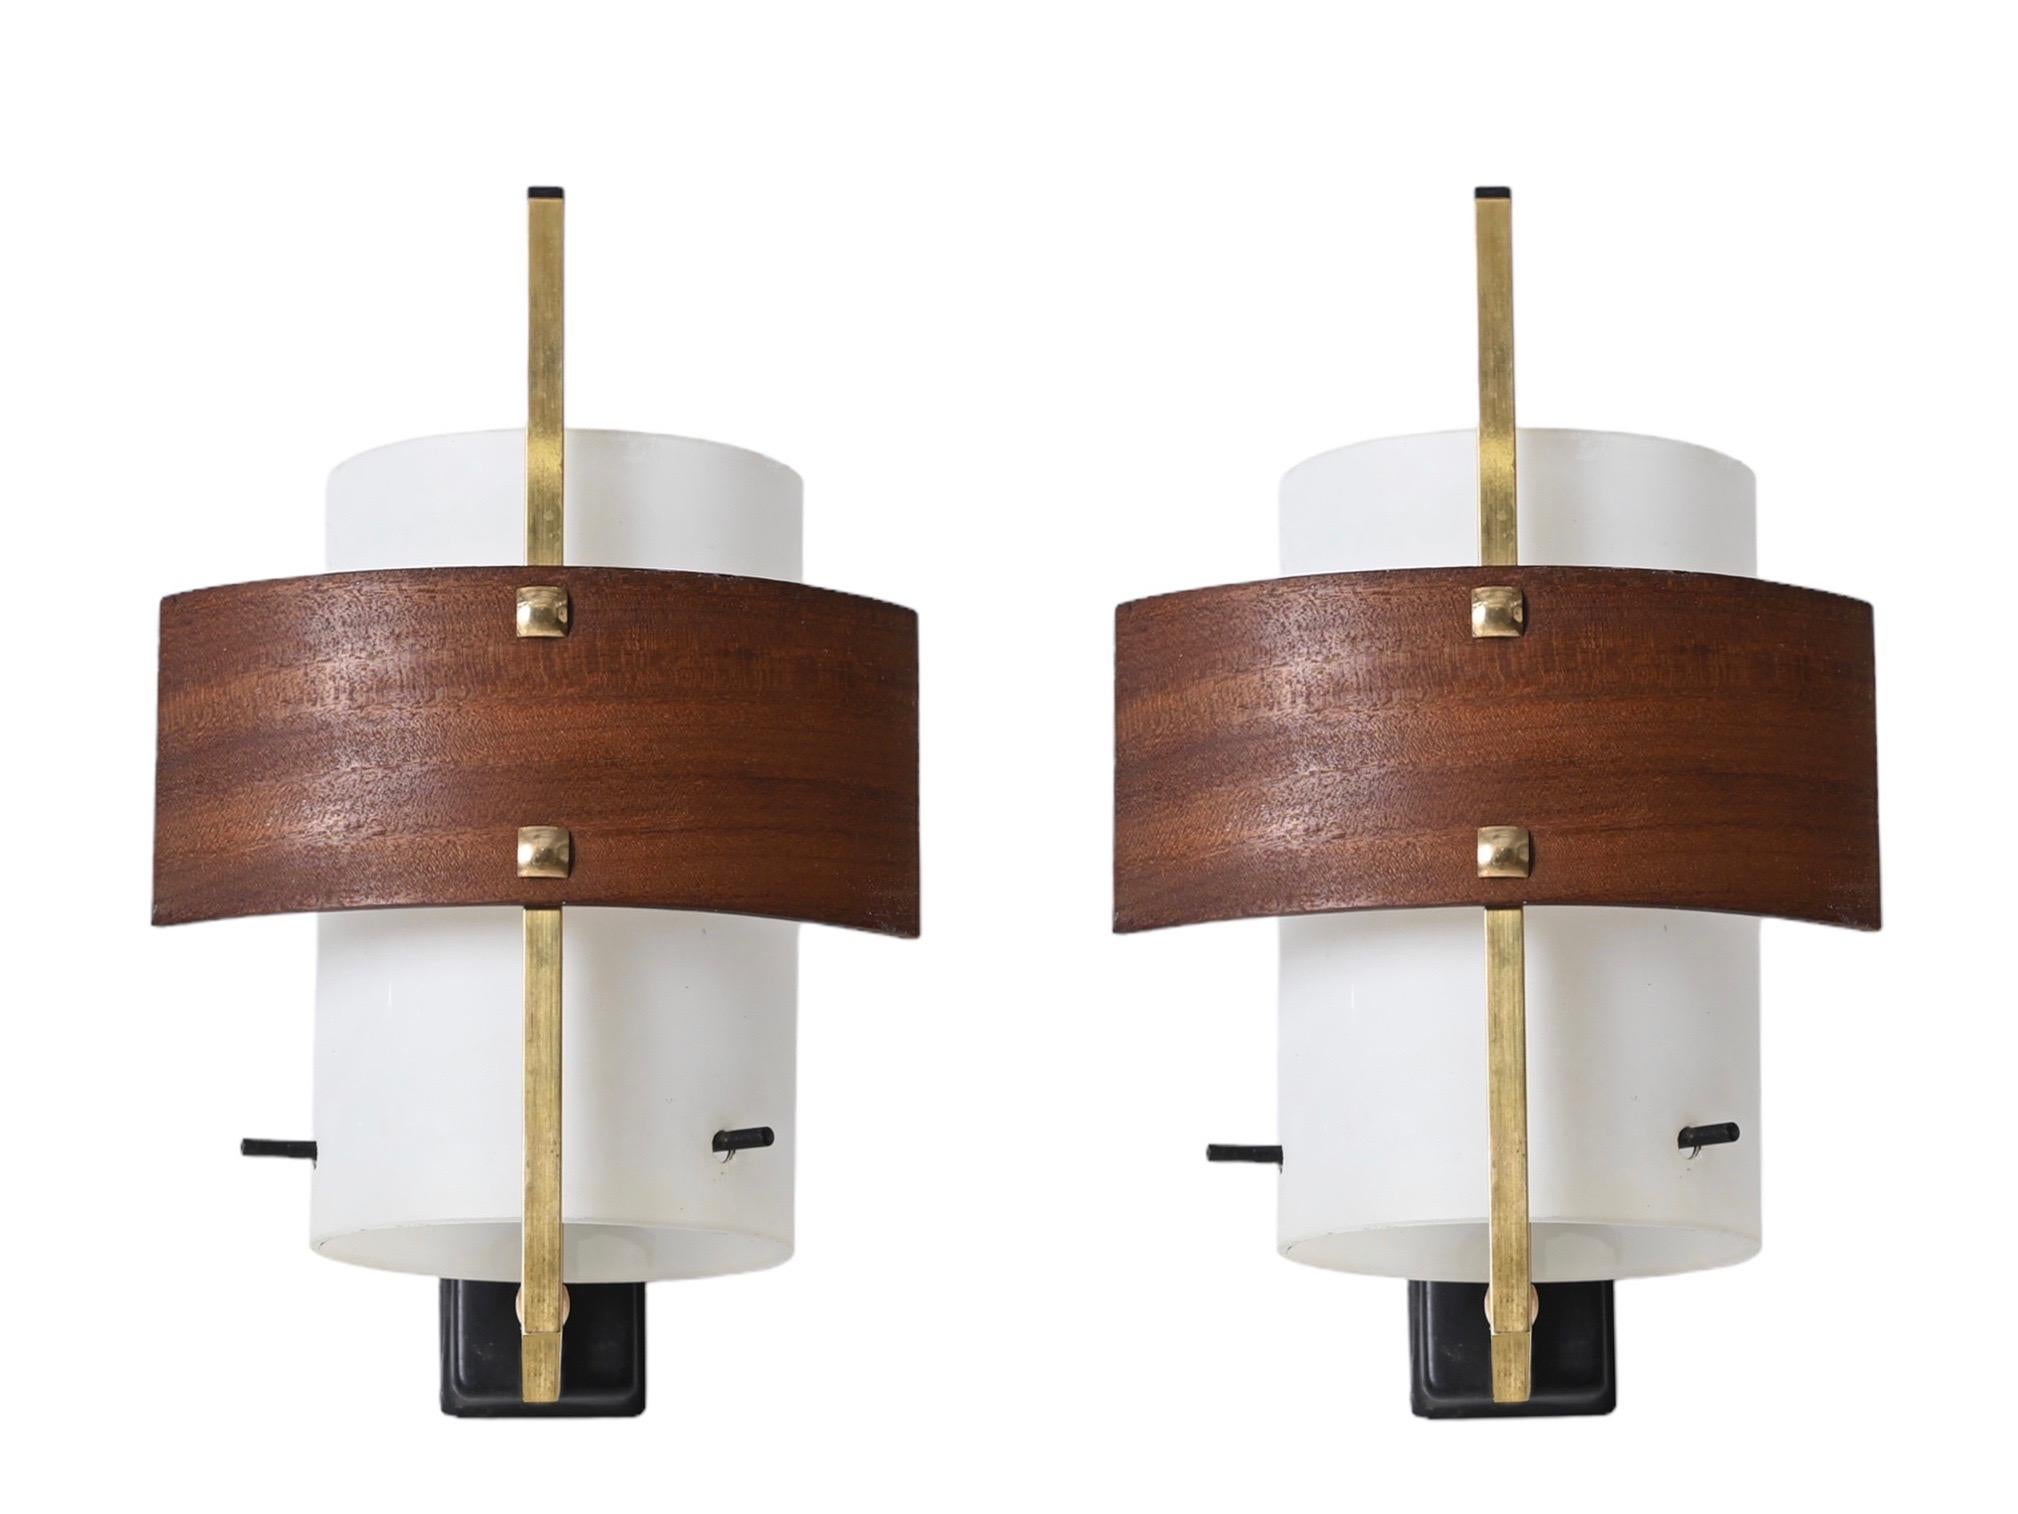 Gorgeous pair of sconces in opaline glass, brass and teak wood. This charming wall lights were designed by Studio Reggiani in Italy in the 1960s. 

These sconces feature a brass arm with three black lacquered metal supports that hold a stunning